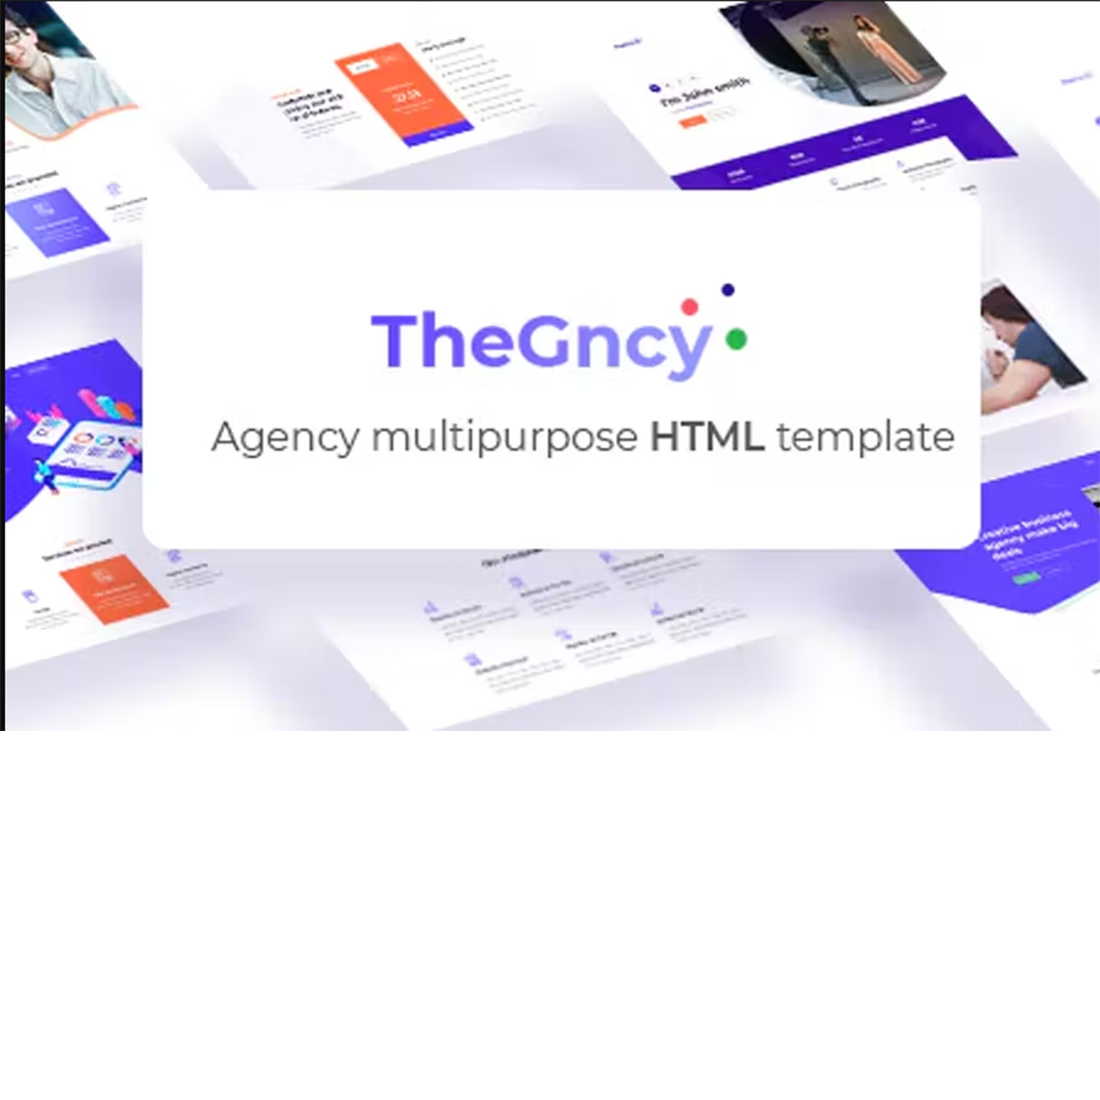 Free TheGncy Multipurpose Agency HTML Template preview image.